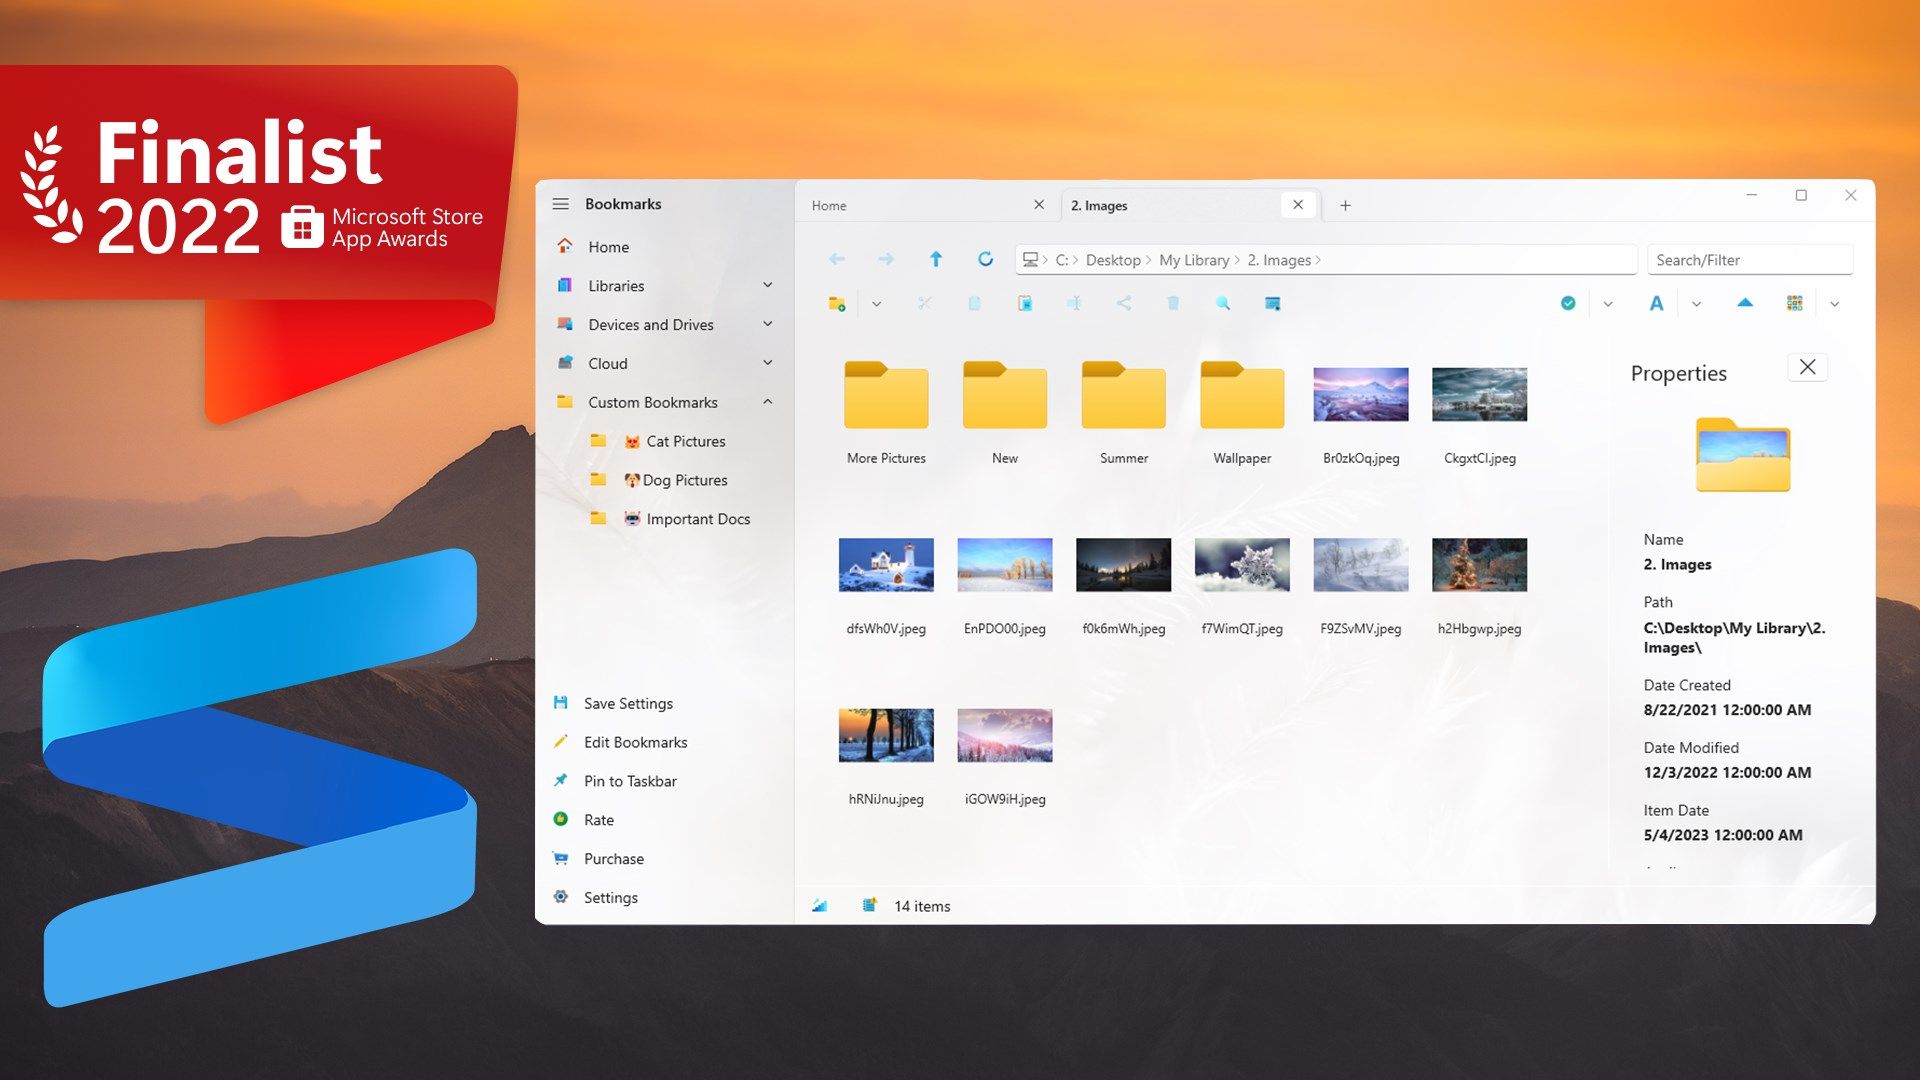 S Files Pro X - Shrestha File Explorer and Manager App